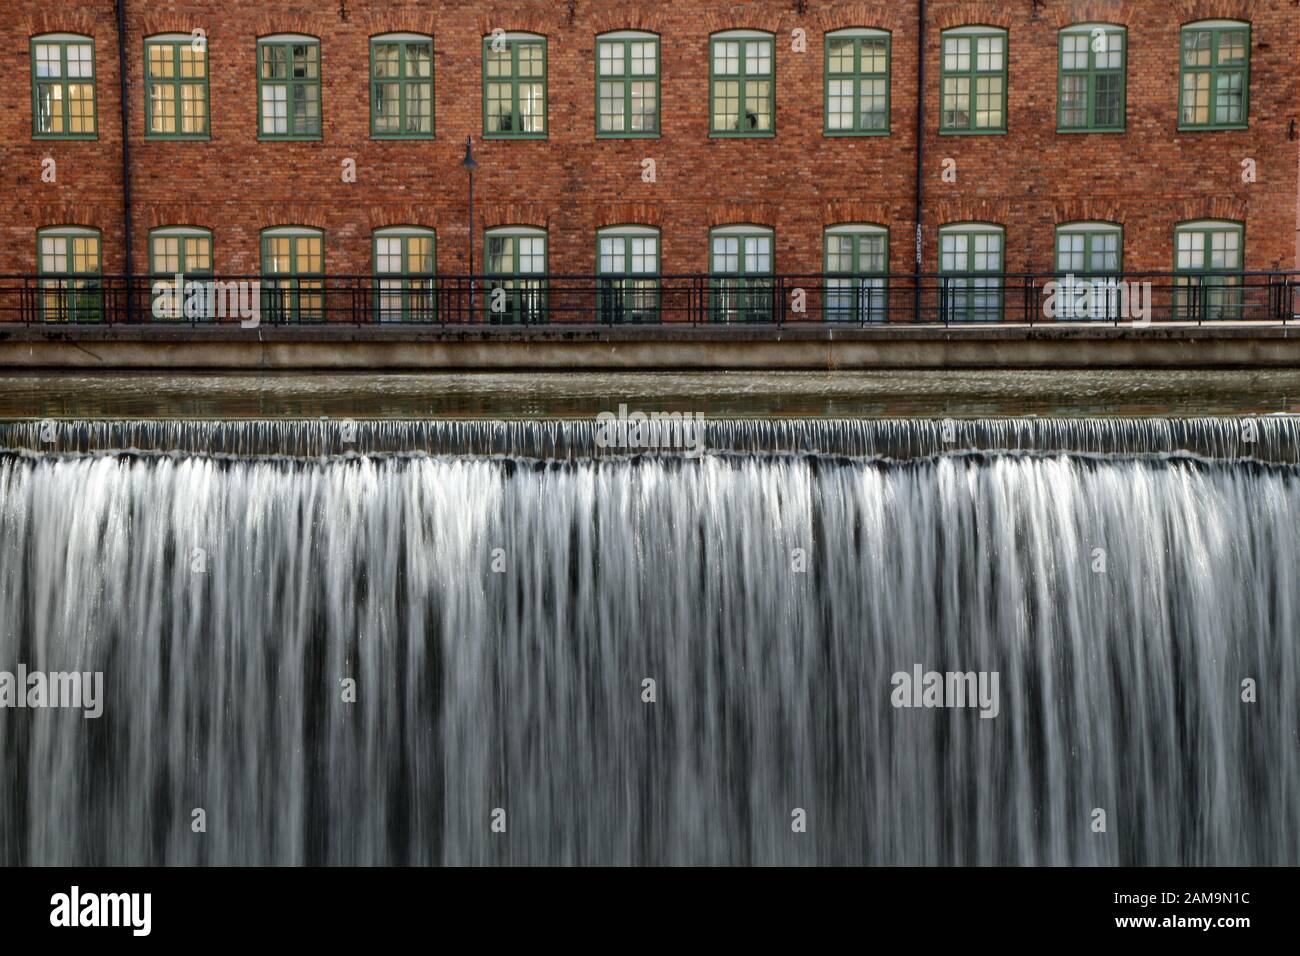 The Industrial center of the city of Norrköping in Sweden. The nice Industrial buildings with typical nordic design surrounded by water. Stock Photo